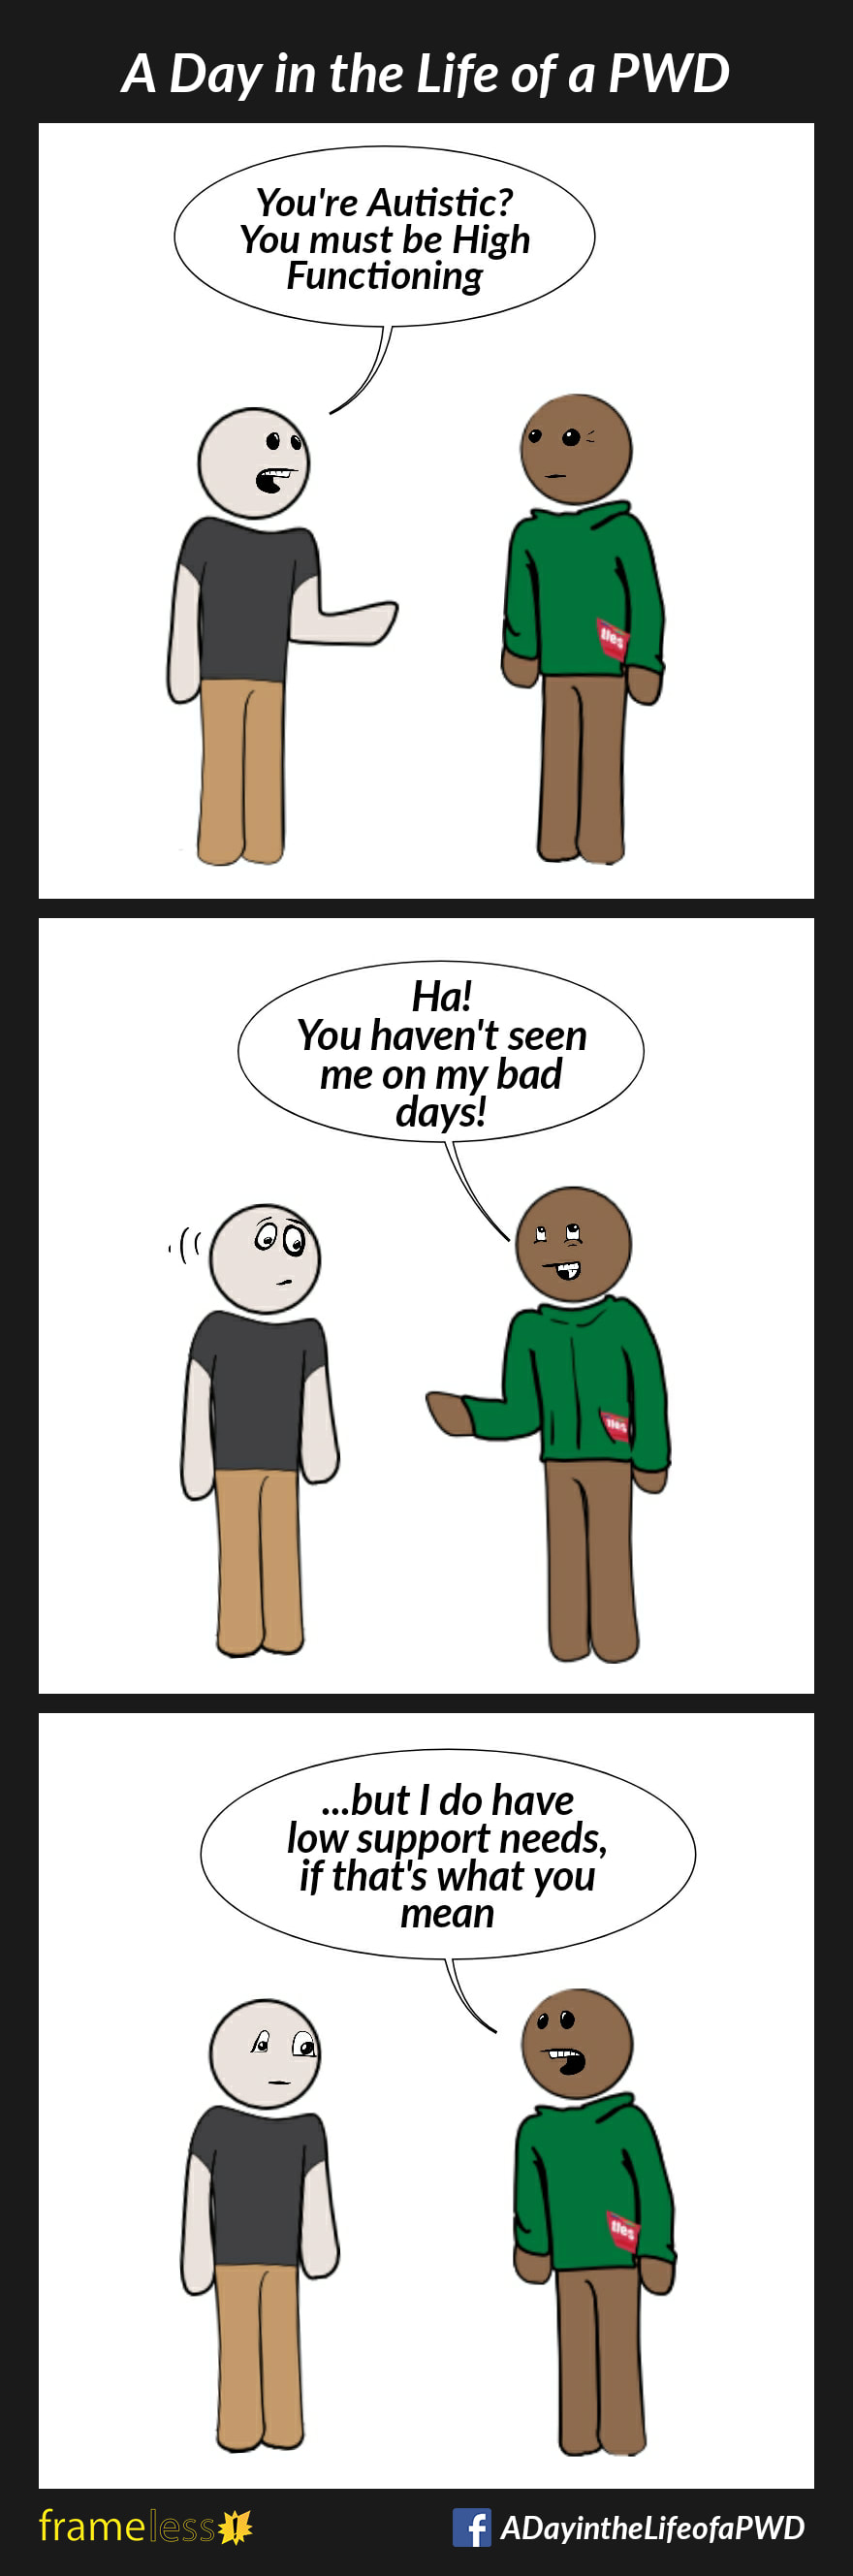 COMIC STRIP 
A Day in the Life of a PWD (Person With a Disability) 

Frame 1:
A man is talking with an acquaintance. 
ACQUAINTANCE: You're Autistic? You must be High Functioning

Frame 2: 
MAN: Ha! You haven't seen me on my bad days!

Frame 3:
MAN: ...but I do have low support needs, if that's what you mean